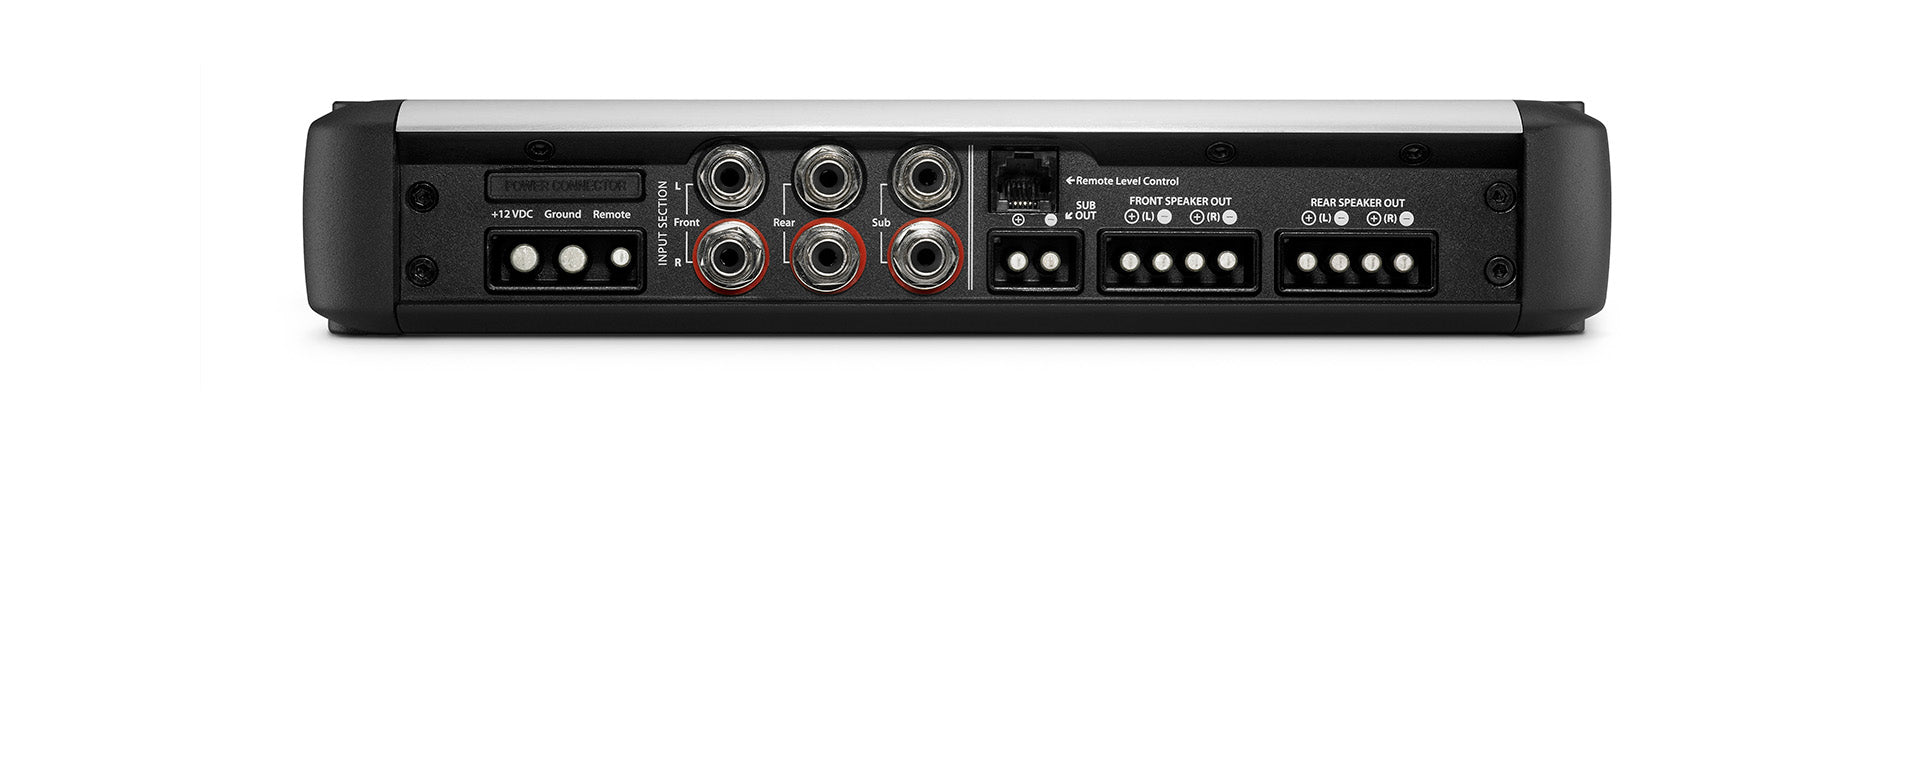 The input panel of a HD amplifier.